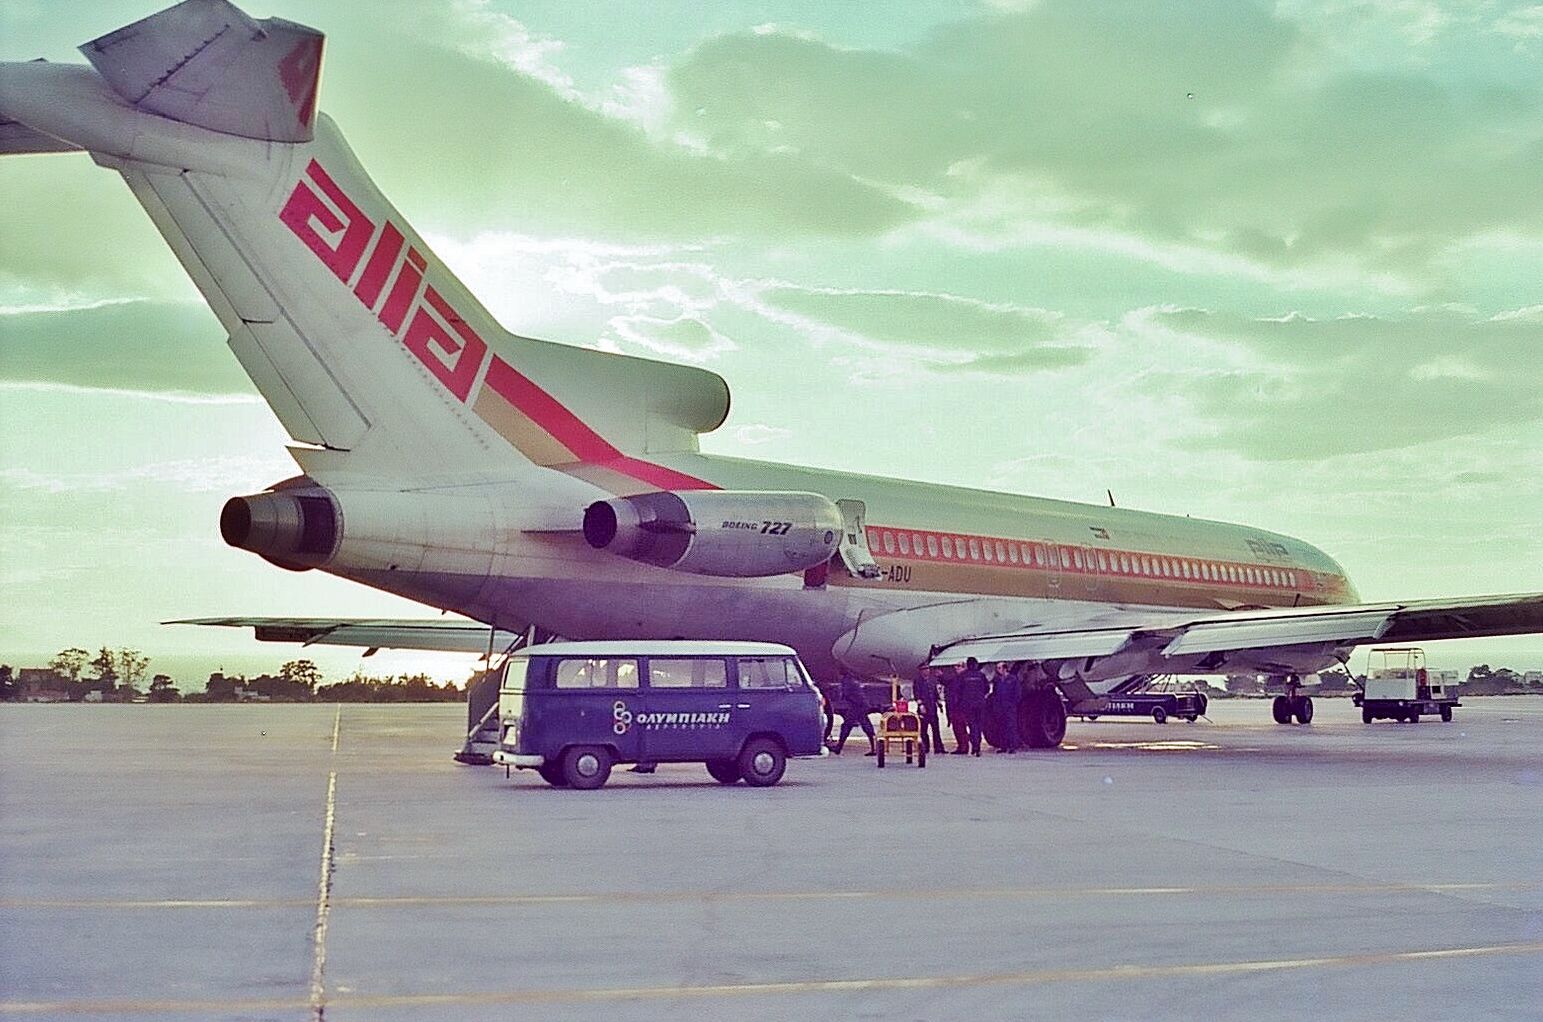 A Royal Jordinian Boeing 727 parked at an airfield.